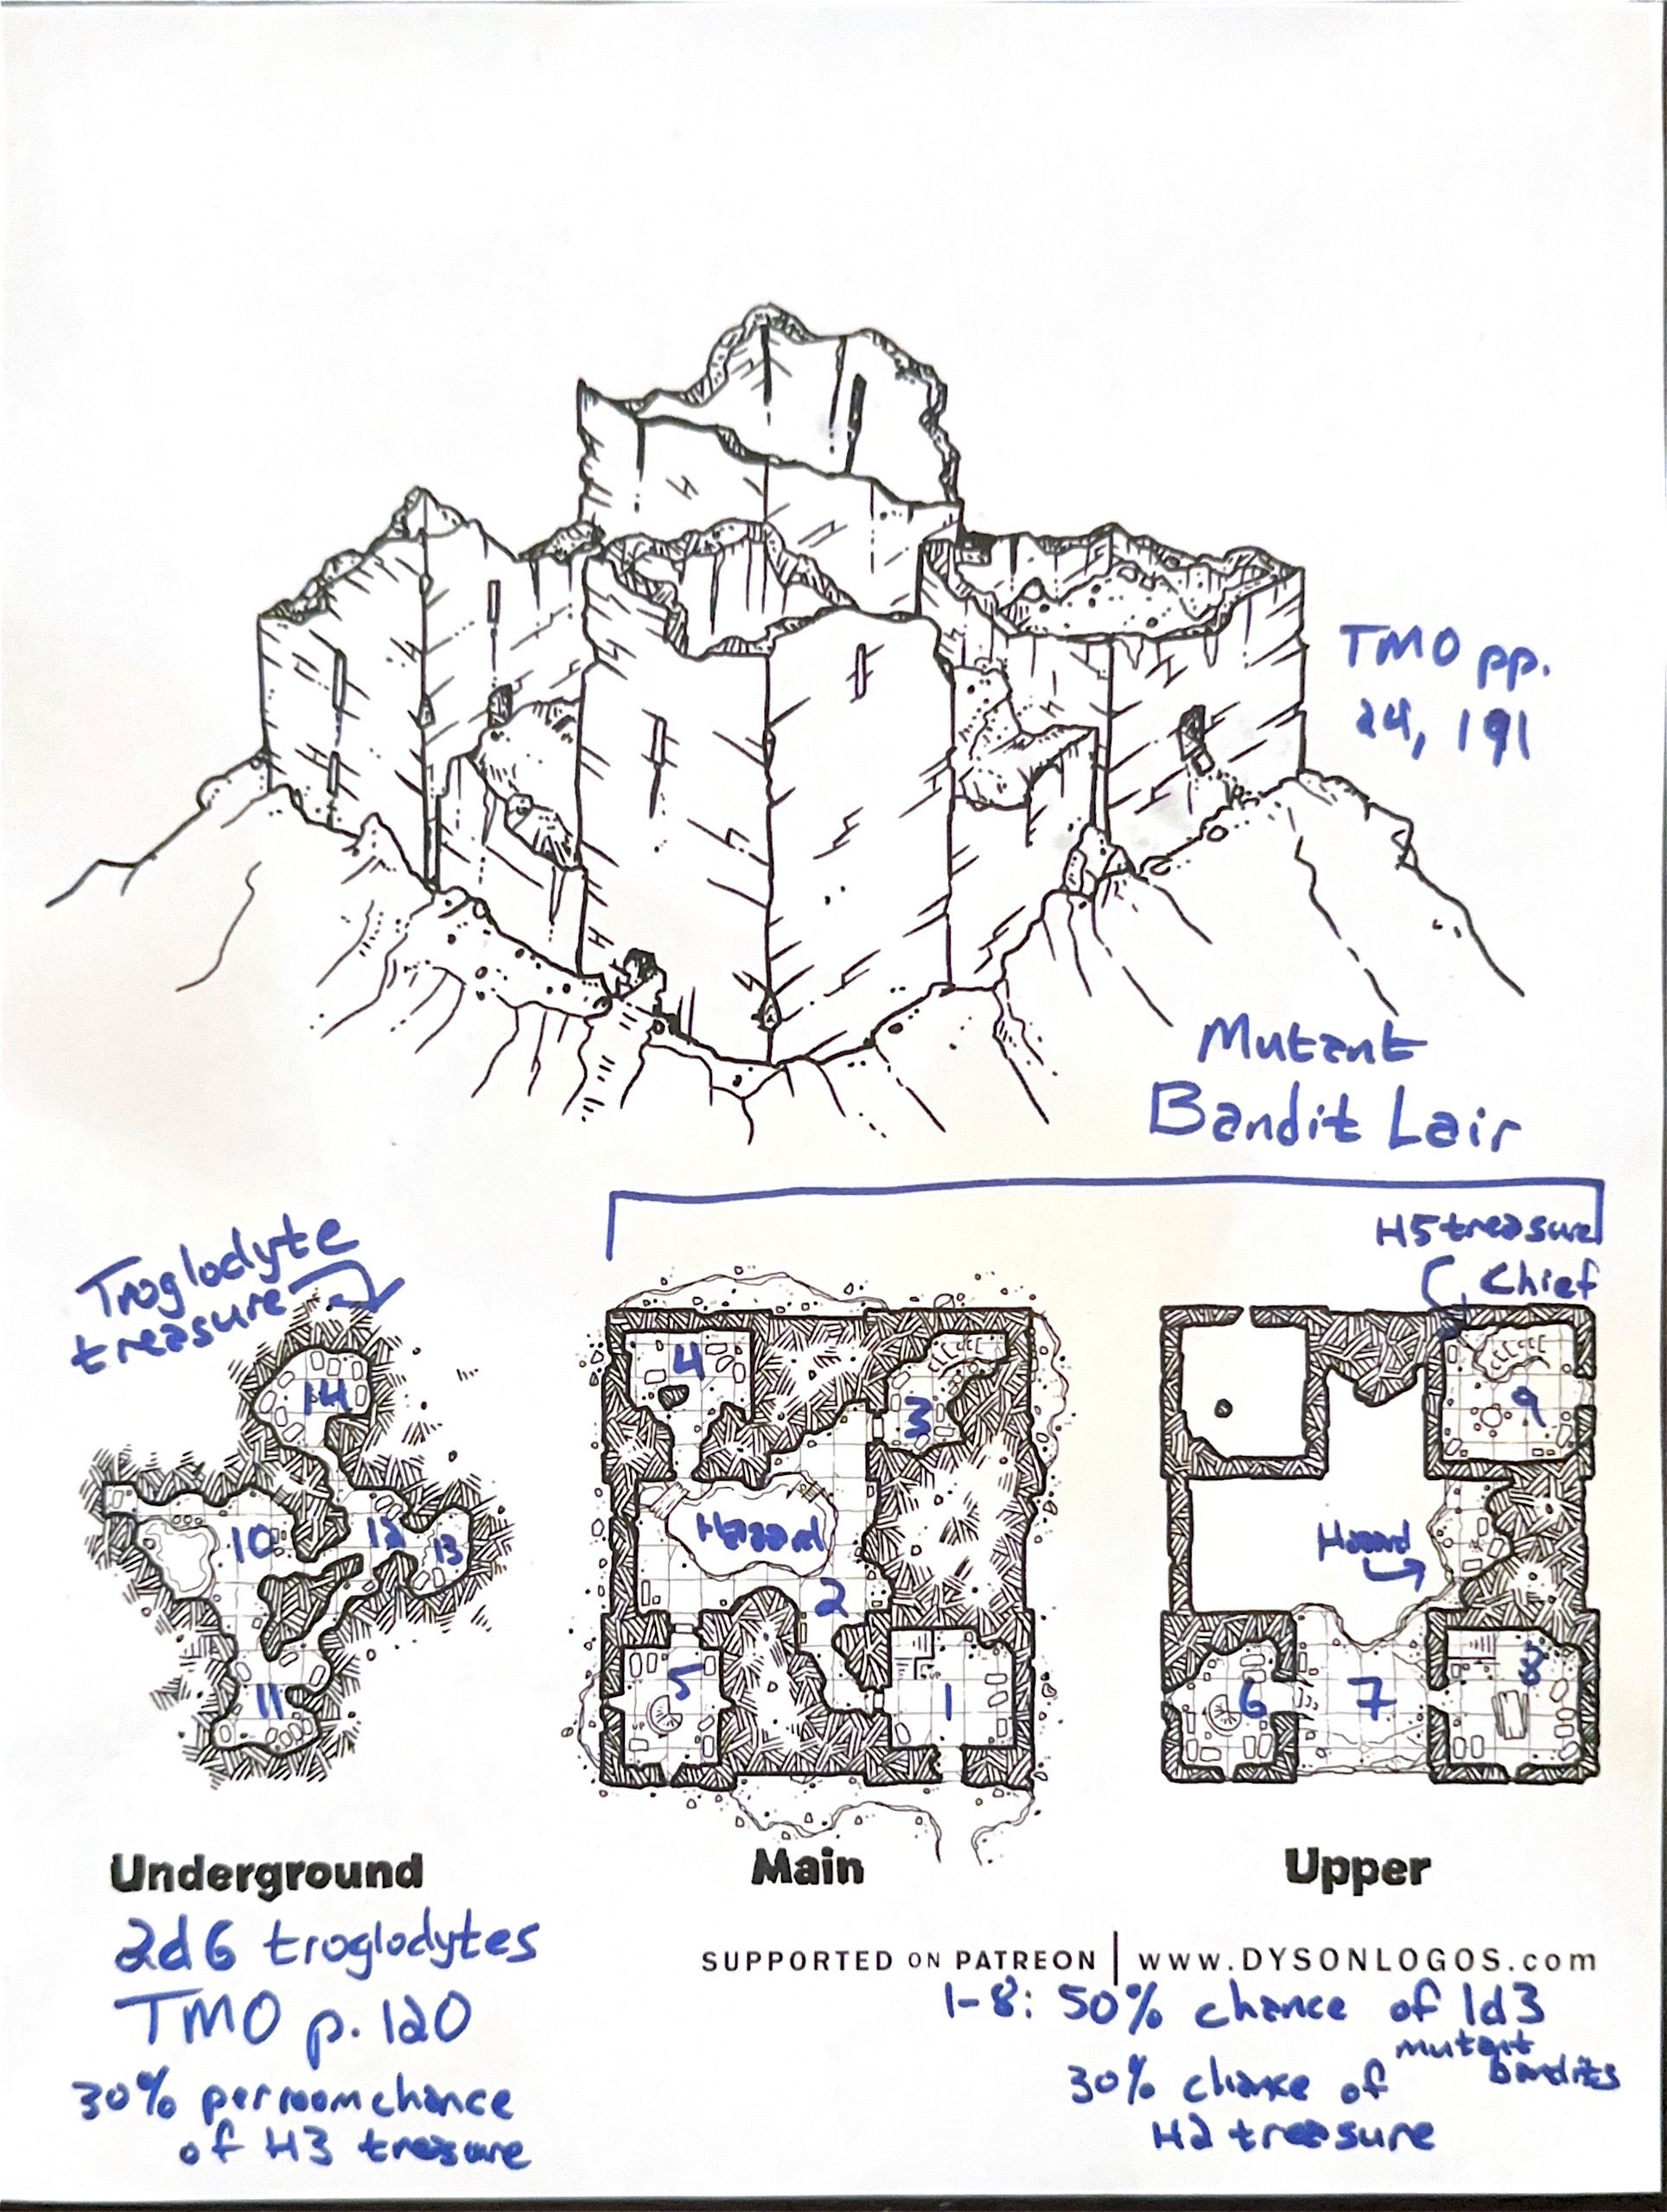 Dyson’s map with my notes